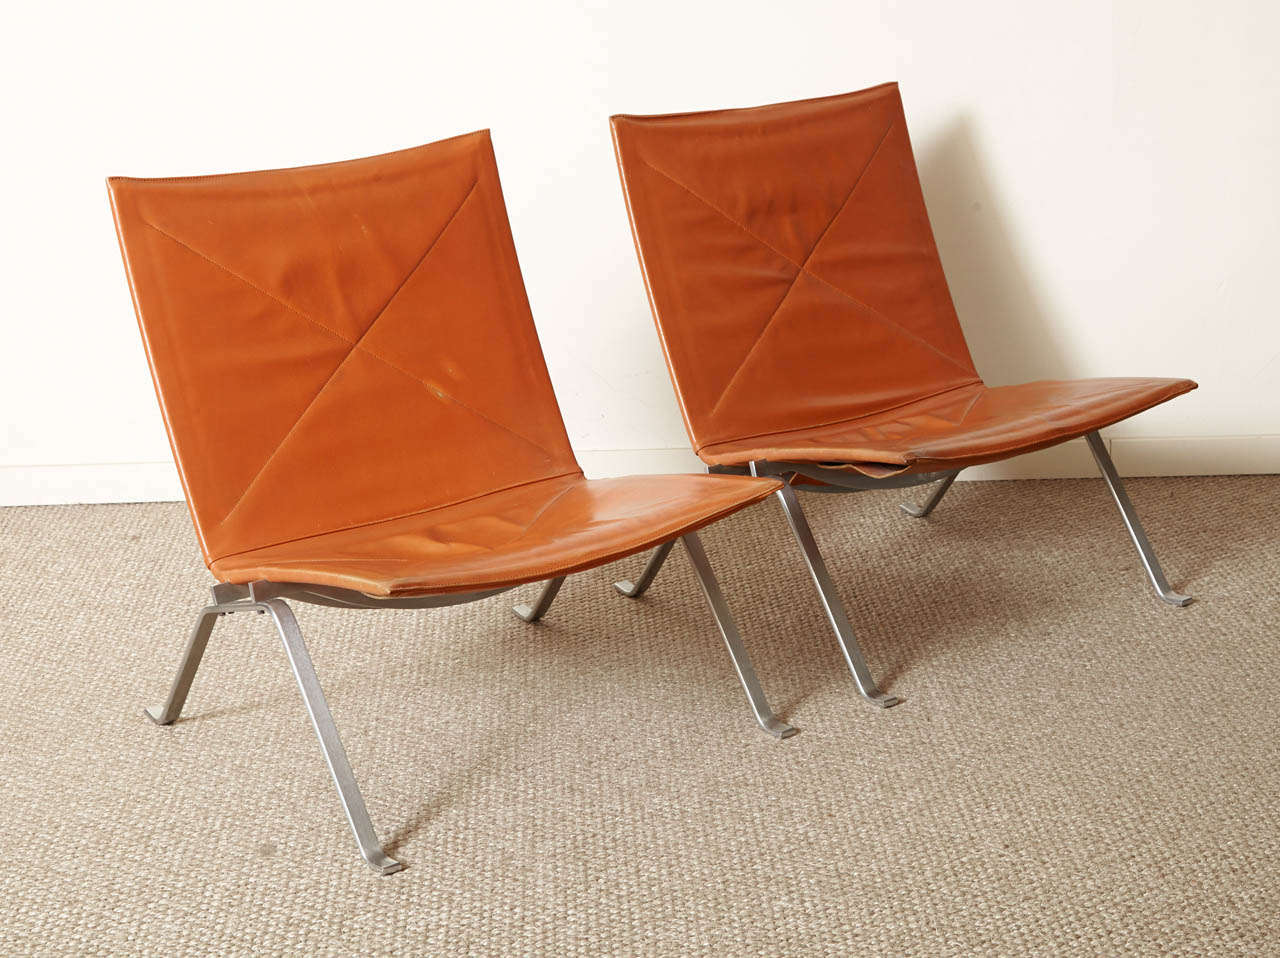 A pair of 1960 loungechairs by Poul Kjaerholm, with the original stamp by Kold Christensen.